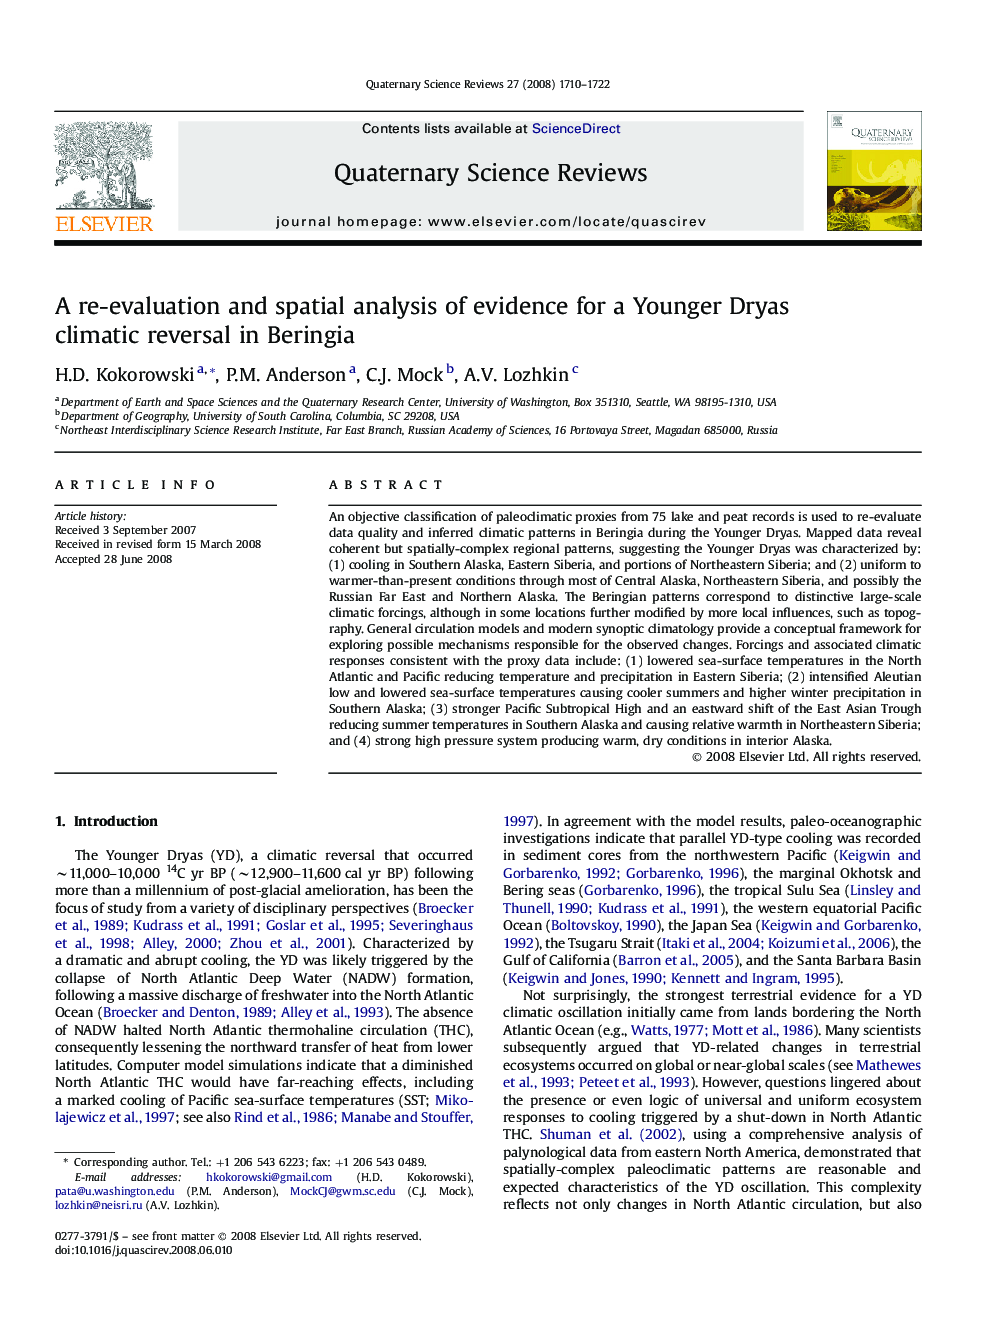 A re-evaluation and spatial analysis of evidence for a Younger Dryas climatic reversal in Beringia